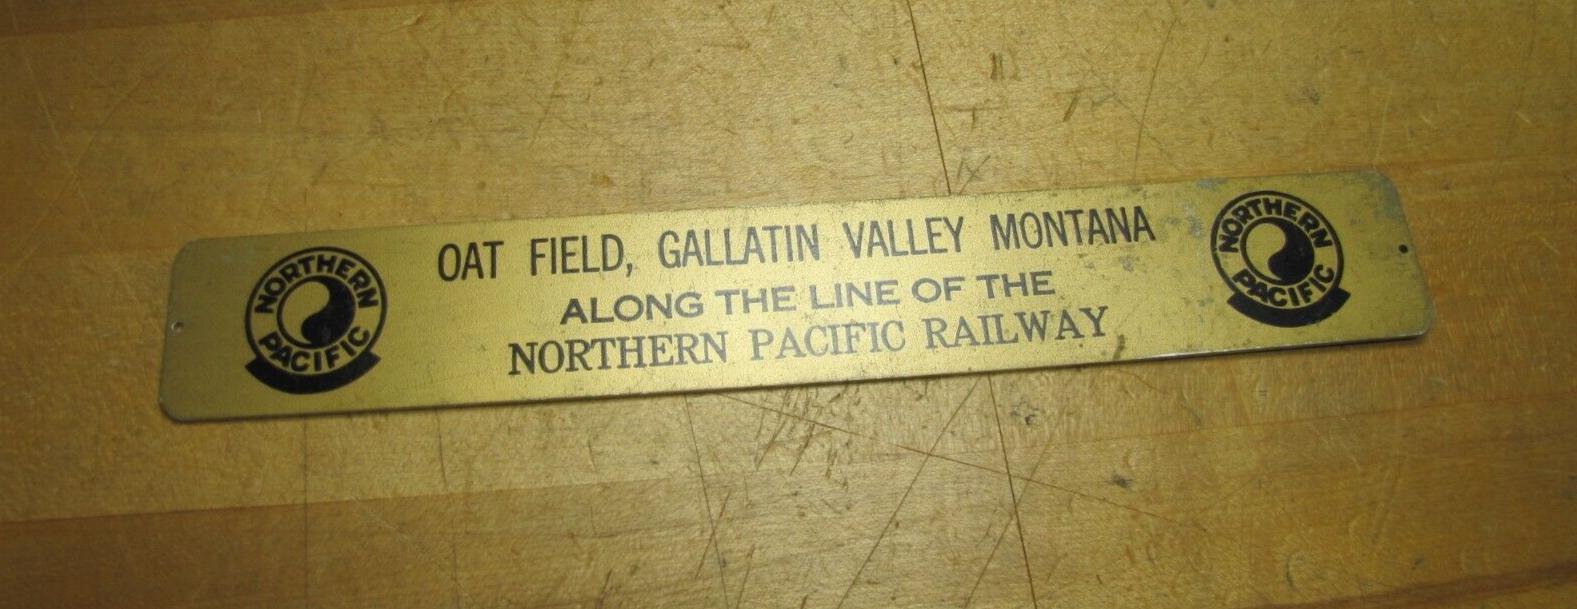 NORTHERN PACIFIC RAILWAY OAT FIELD GALLATIN VALLEY MONTANA Old Train RR Sign